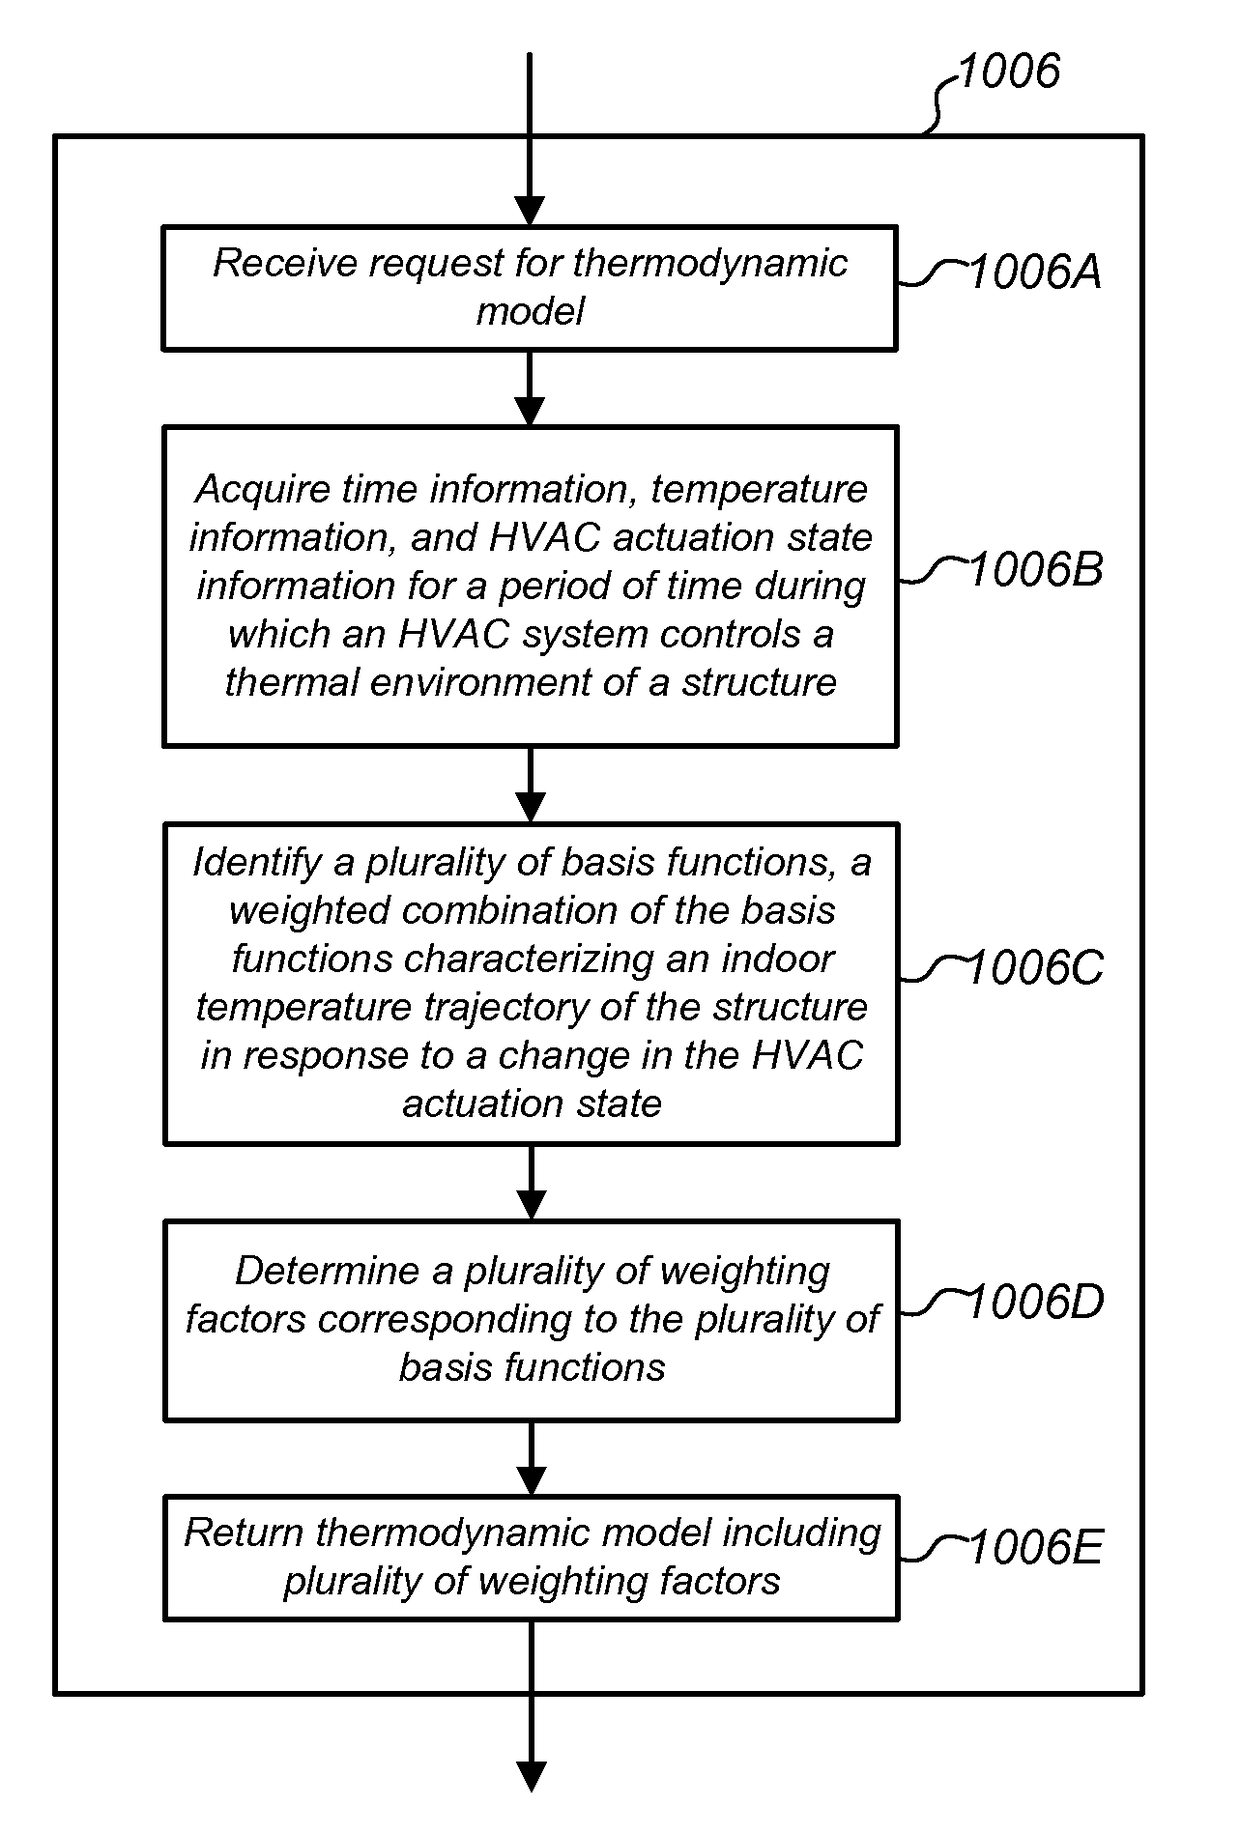 Thermodynamic model generation and implementation using observed HVAC and/or enclosure characteristics